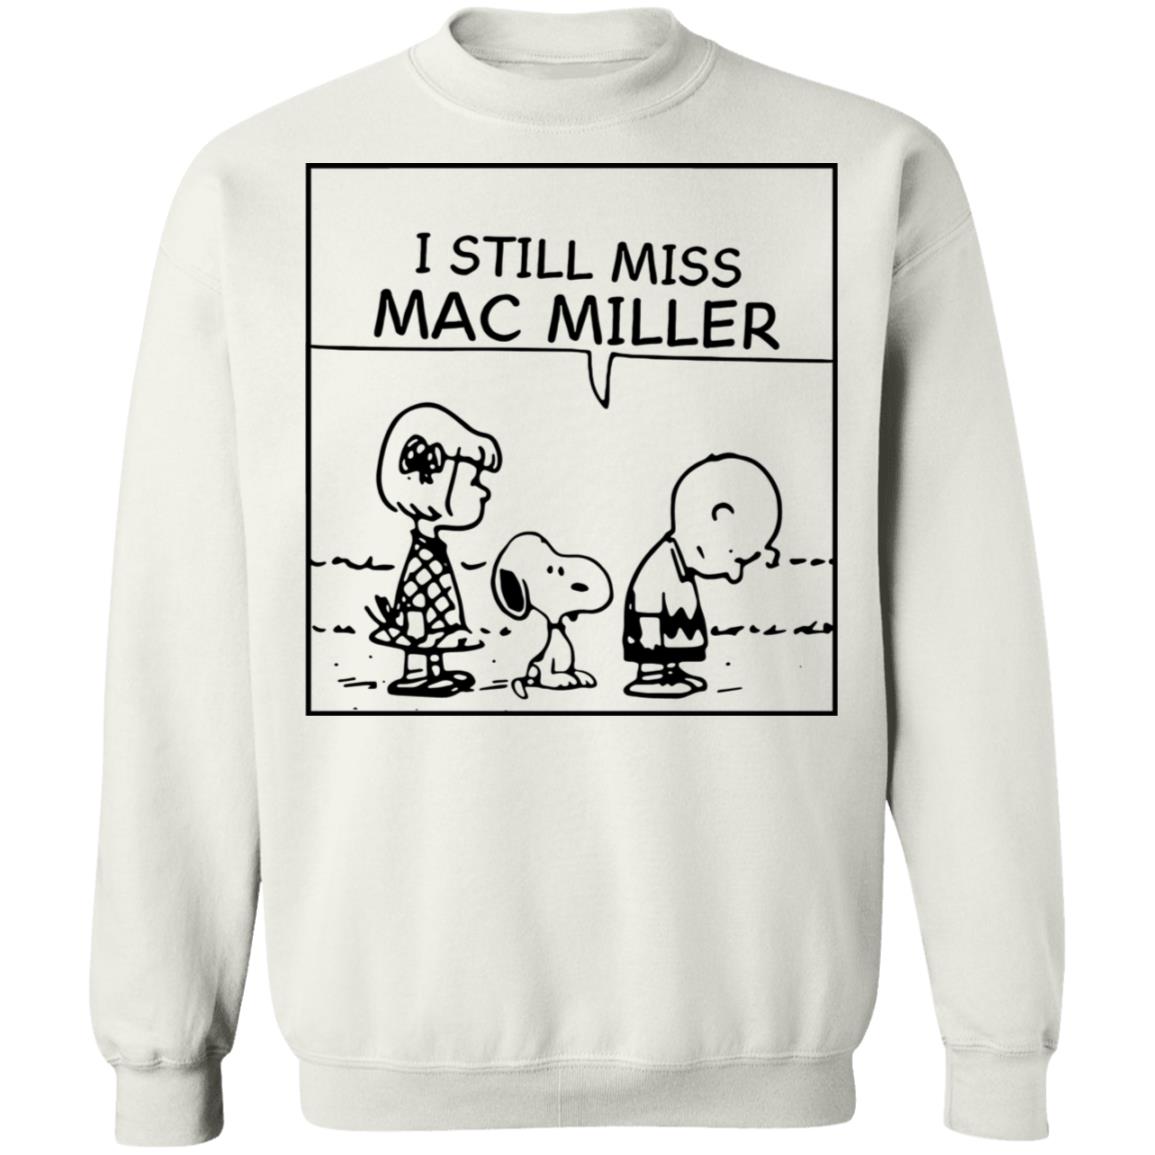 Charlie Brown and Snoopy I still miss Mac Miller shirt